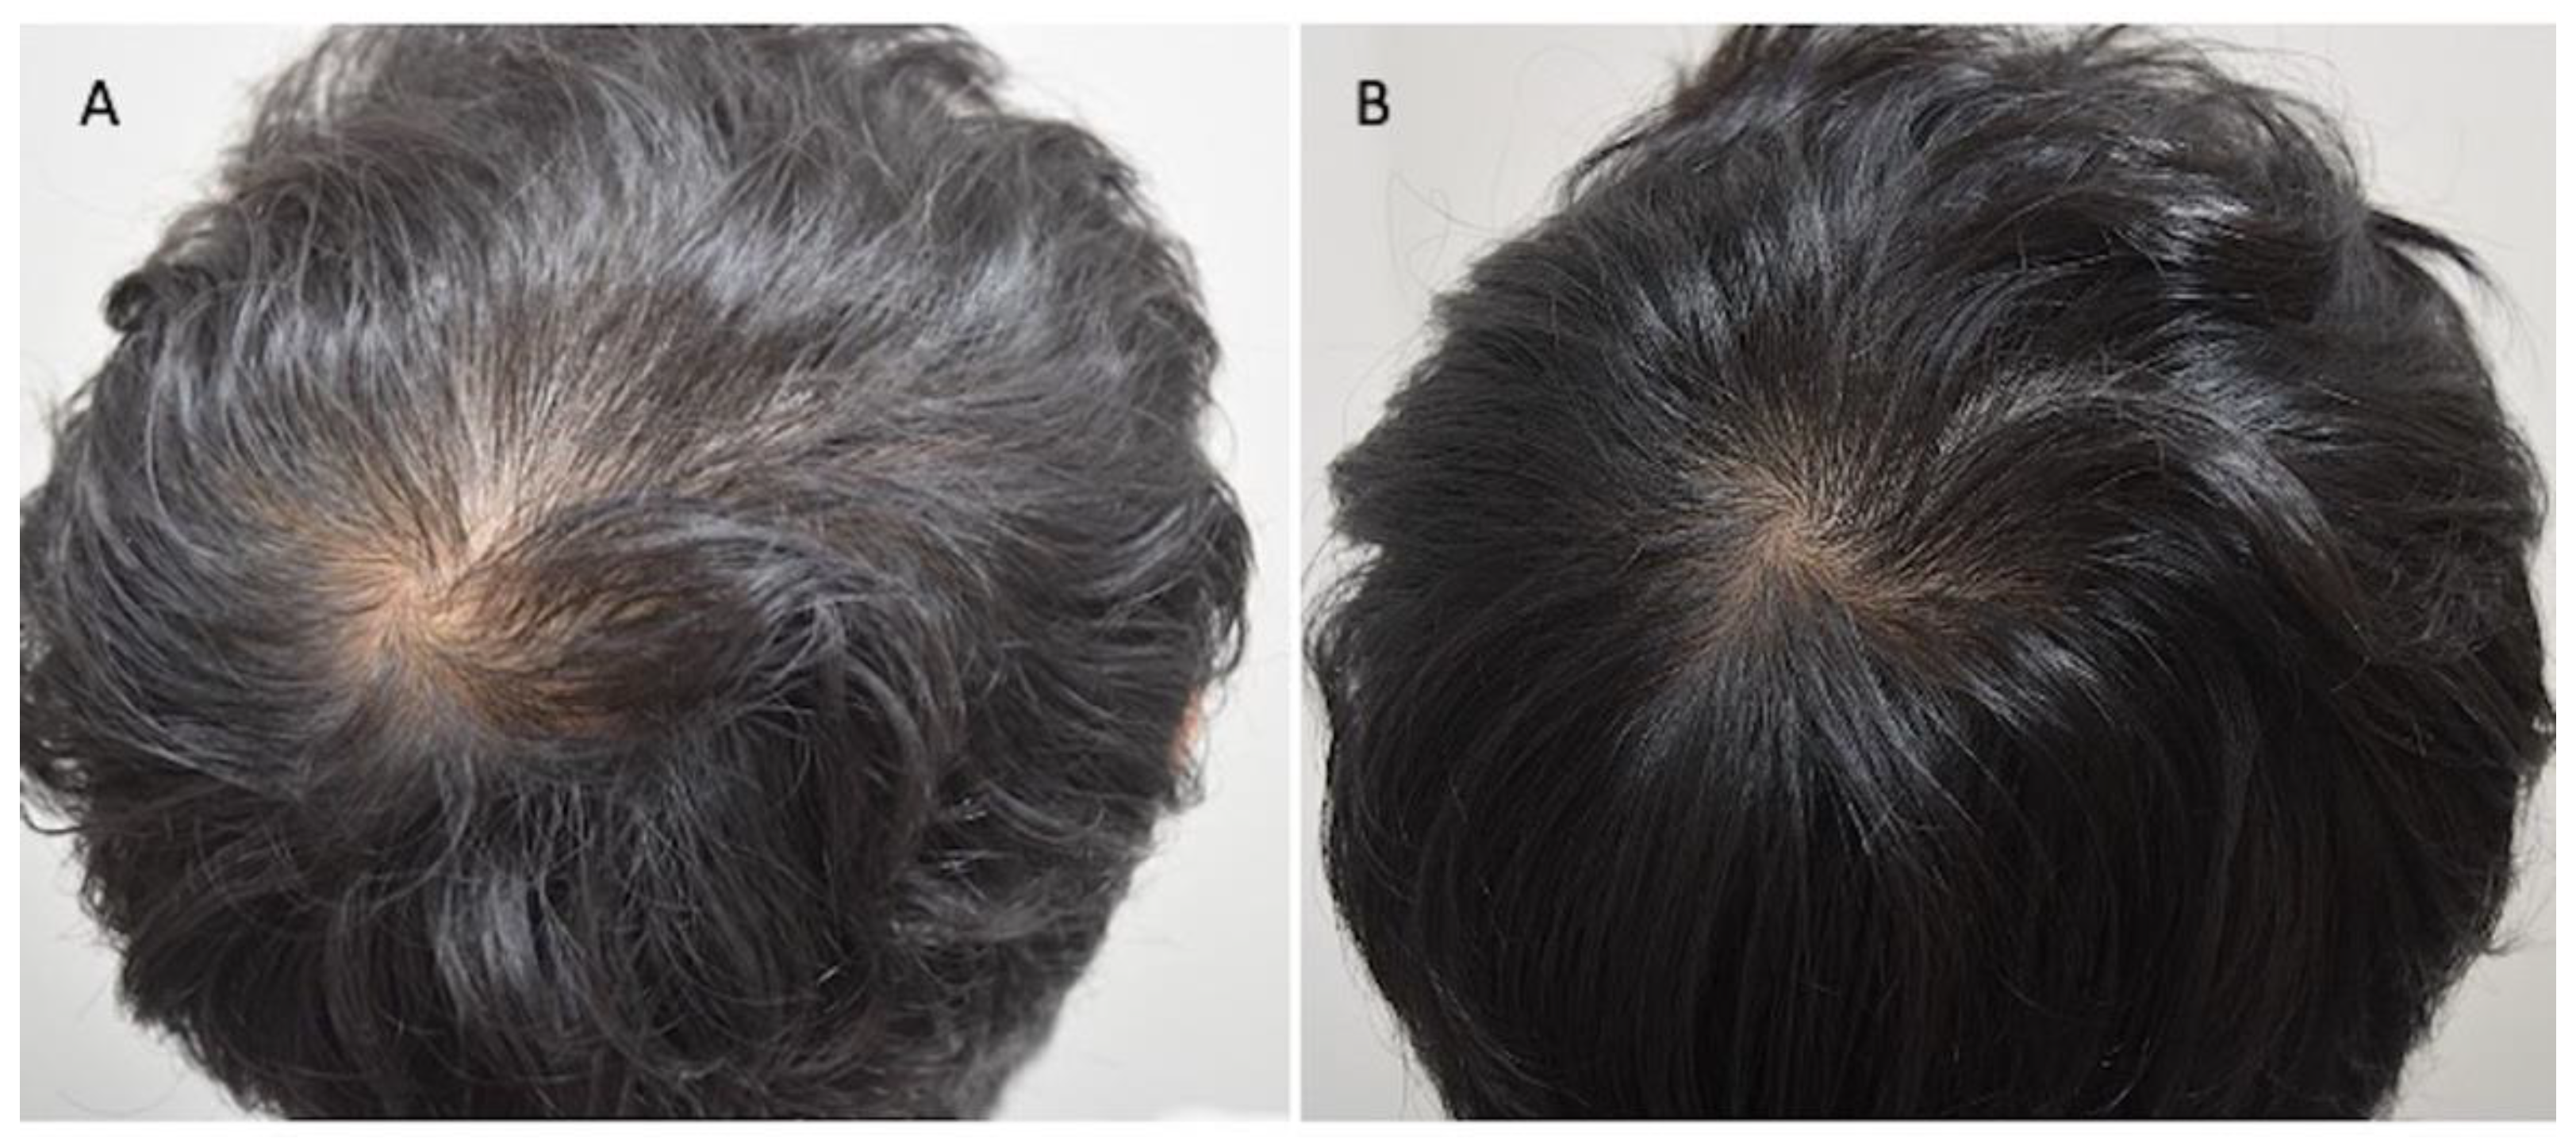 Applied Sciences | Free Full-Text | Regenerative Biotechnologies in Plastic  Surgery: A Multicentric, Retrospective, Case-Series Study on the Use of  Micro-Needling with Low-Level Light/Laser Therapy as a Hair Growth Boost in  Patients